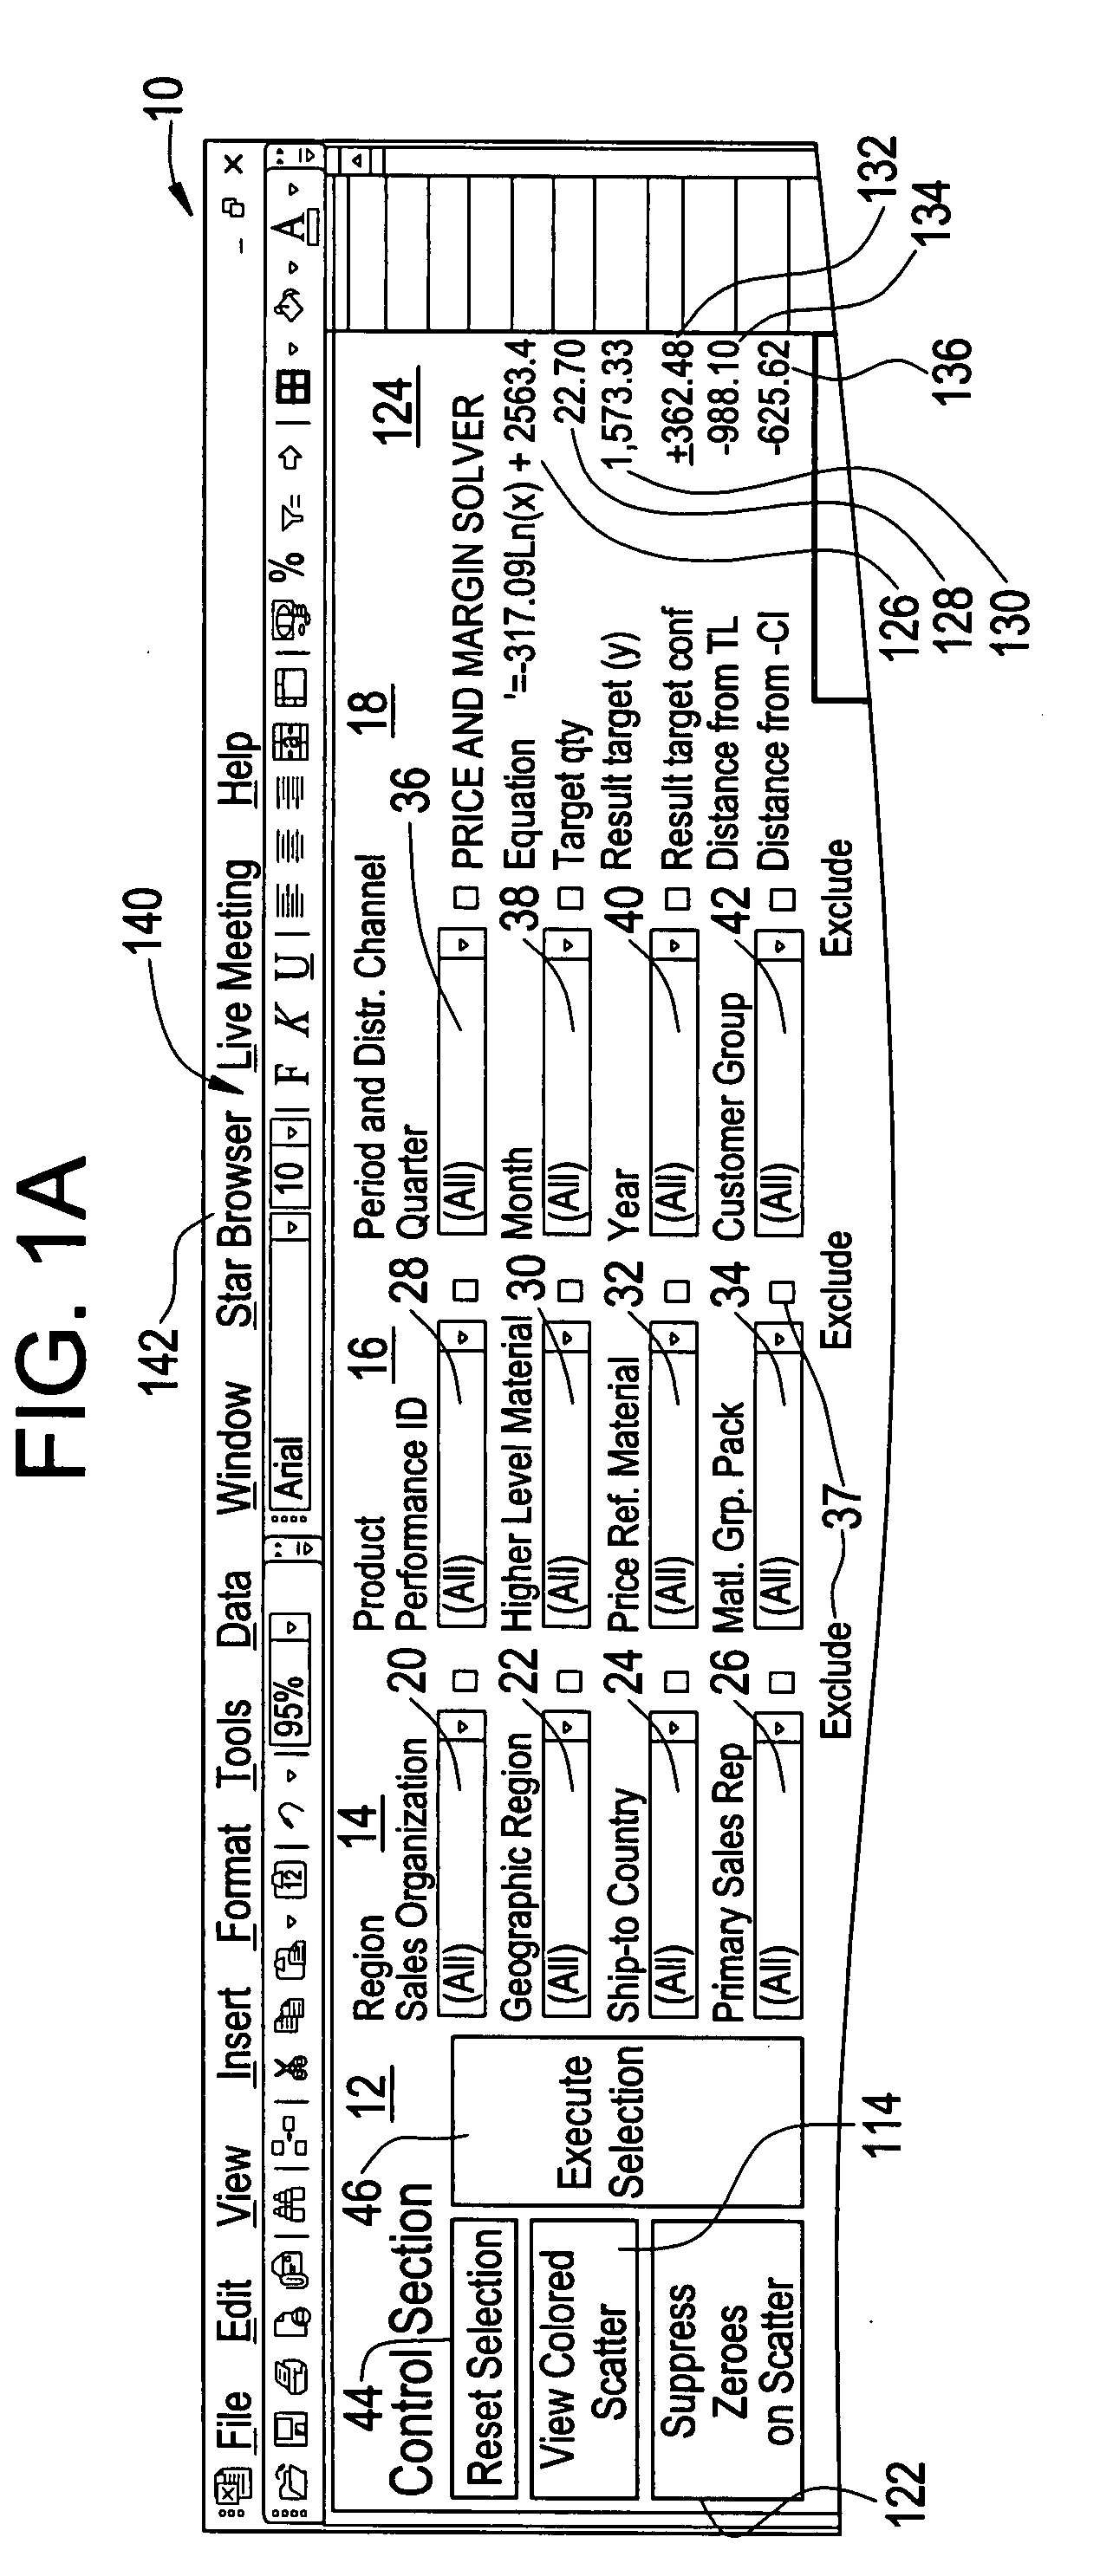 Sales transaction analysis tool and associated method of use